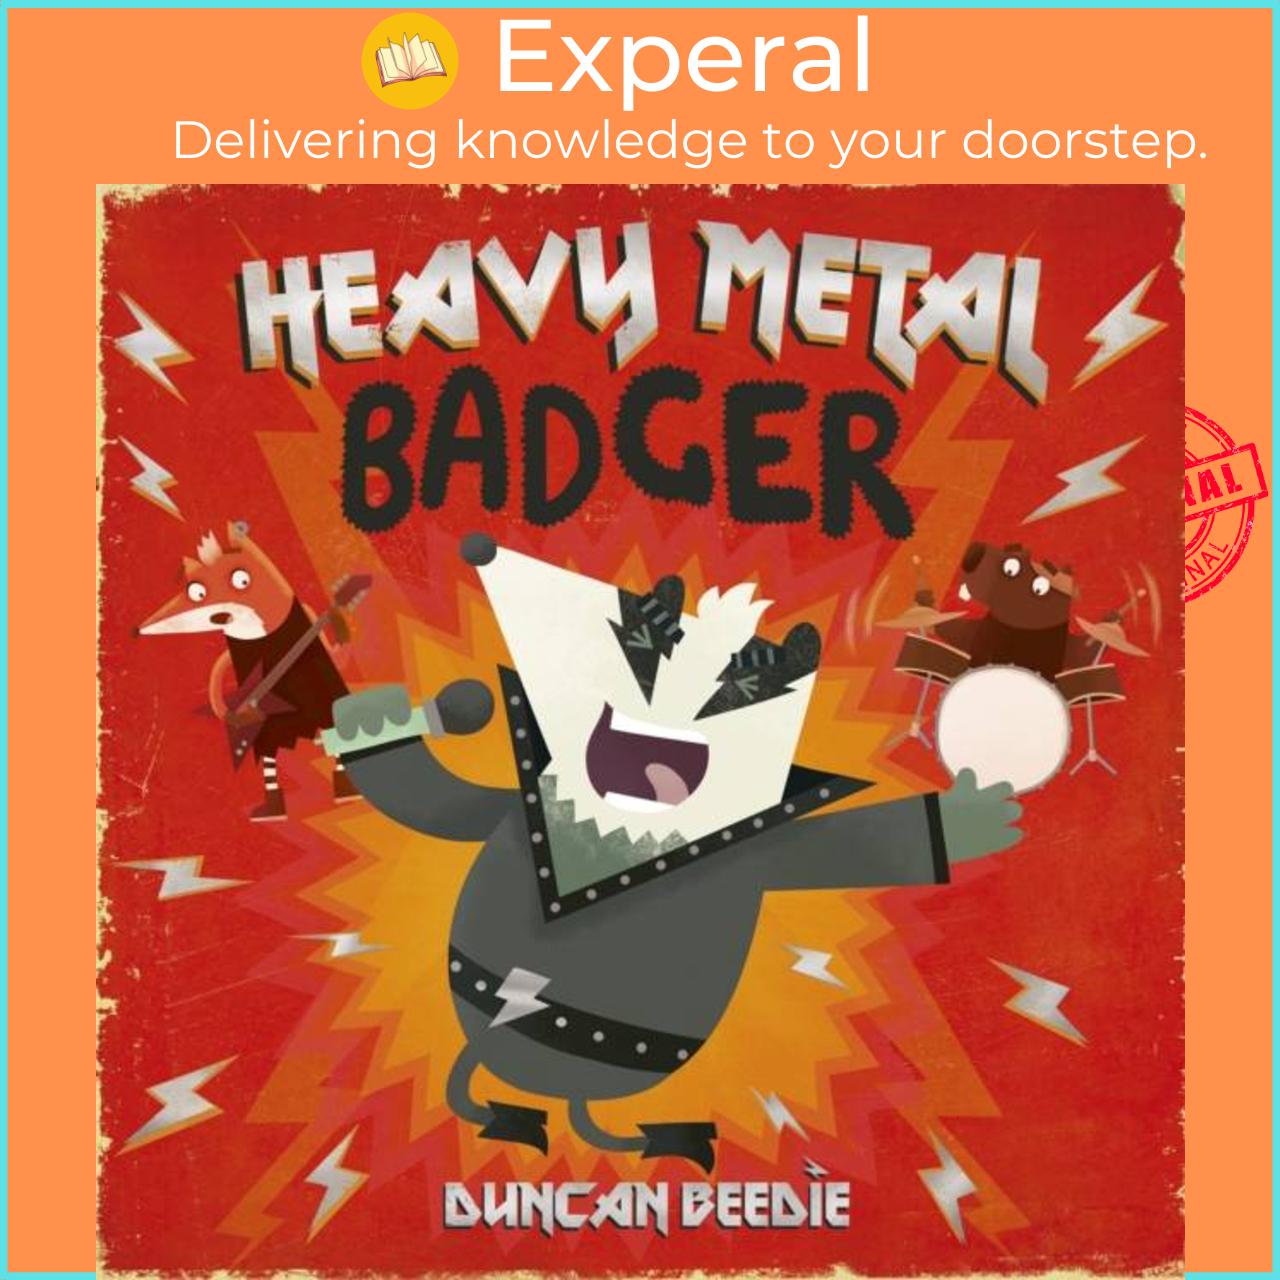 Sách - Heavy Metal Badger by Duncan Beedie (UK edition, hardcover)